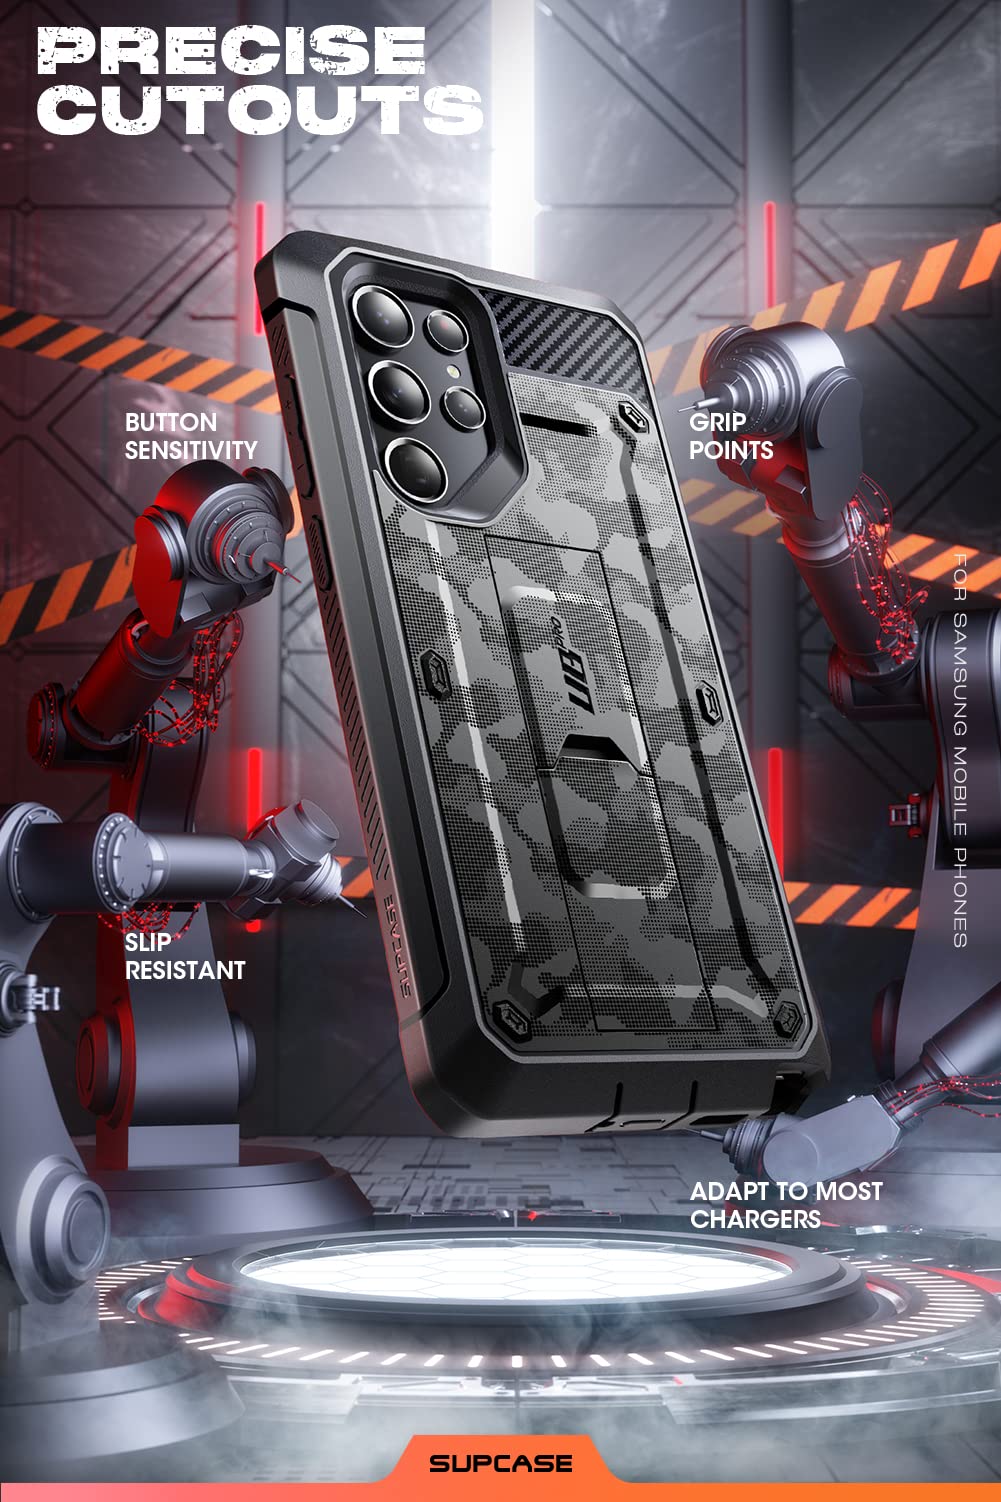 SUPCASE Unicorn Beetle Pro Case for Samsung Galaxy S22 Ultra 5G (2022 Release), [Extra Front Frame] Full-Body Dual Layer Rugged Belt-Clip & Kickstand Case with Built-in Screen Protector (CamoGray)